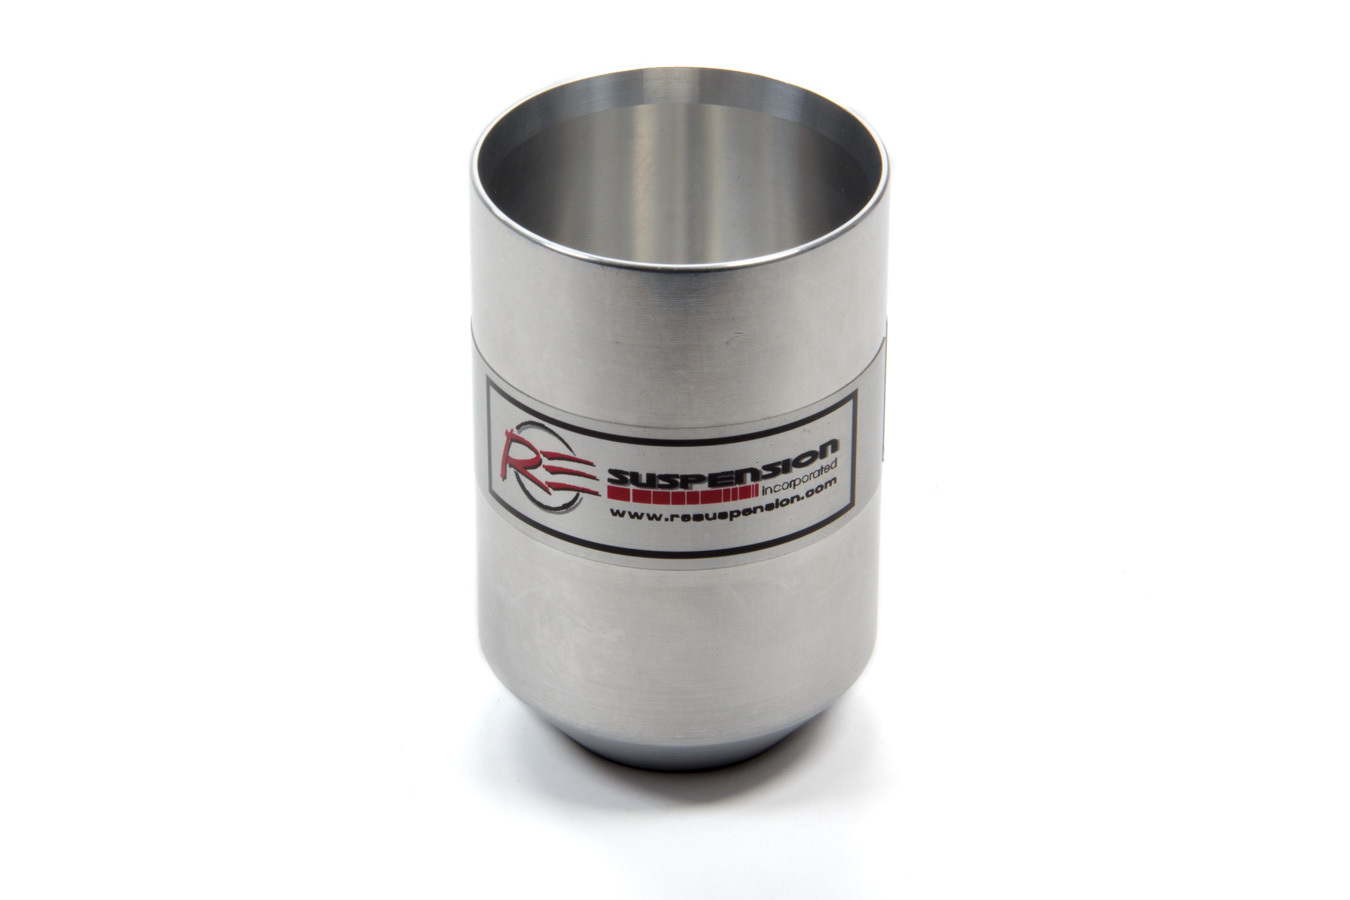 RE Suspension RE-BRCUP-14/3 Bump Stop Cup, 3 in Cup, 14 mm Shaft, Aluminum, Polished, Universal, Each